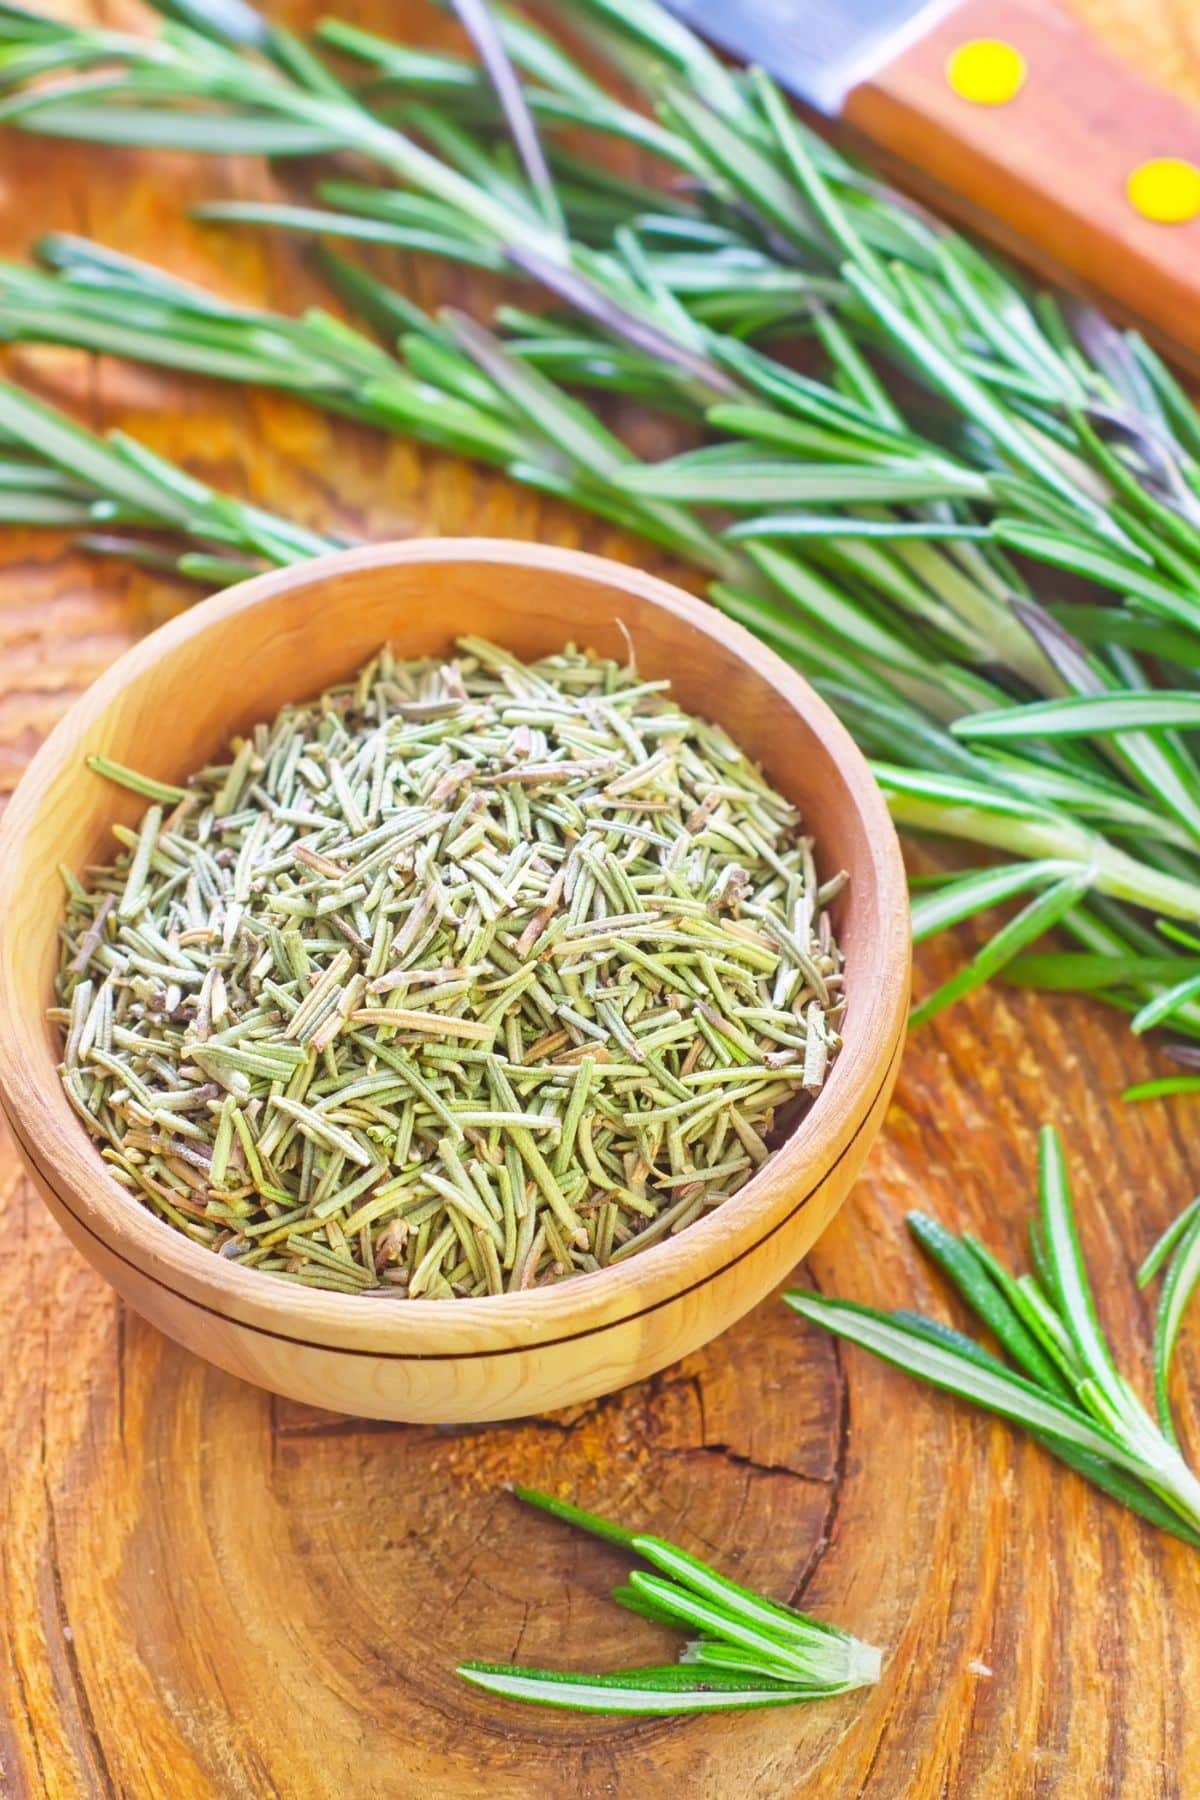 A bowl of dried rosemary next to fresh rosemary.